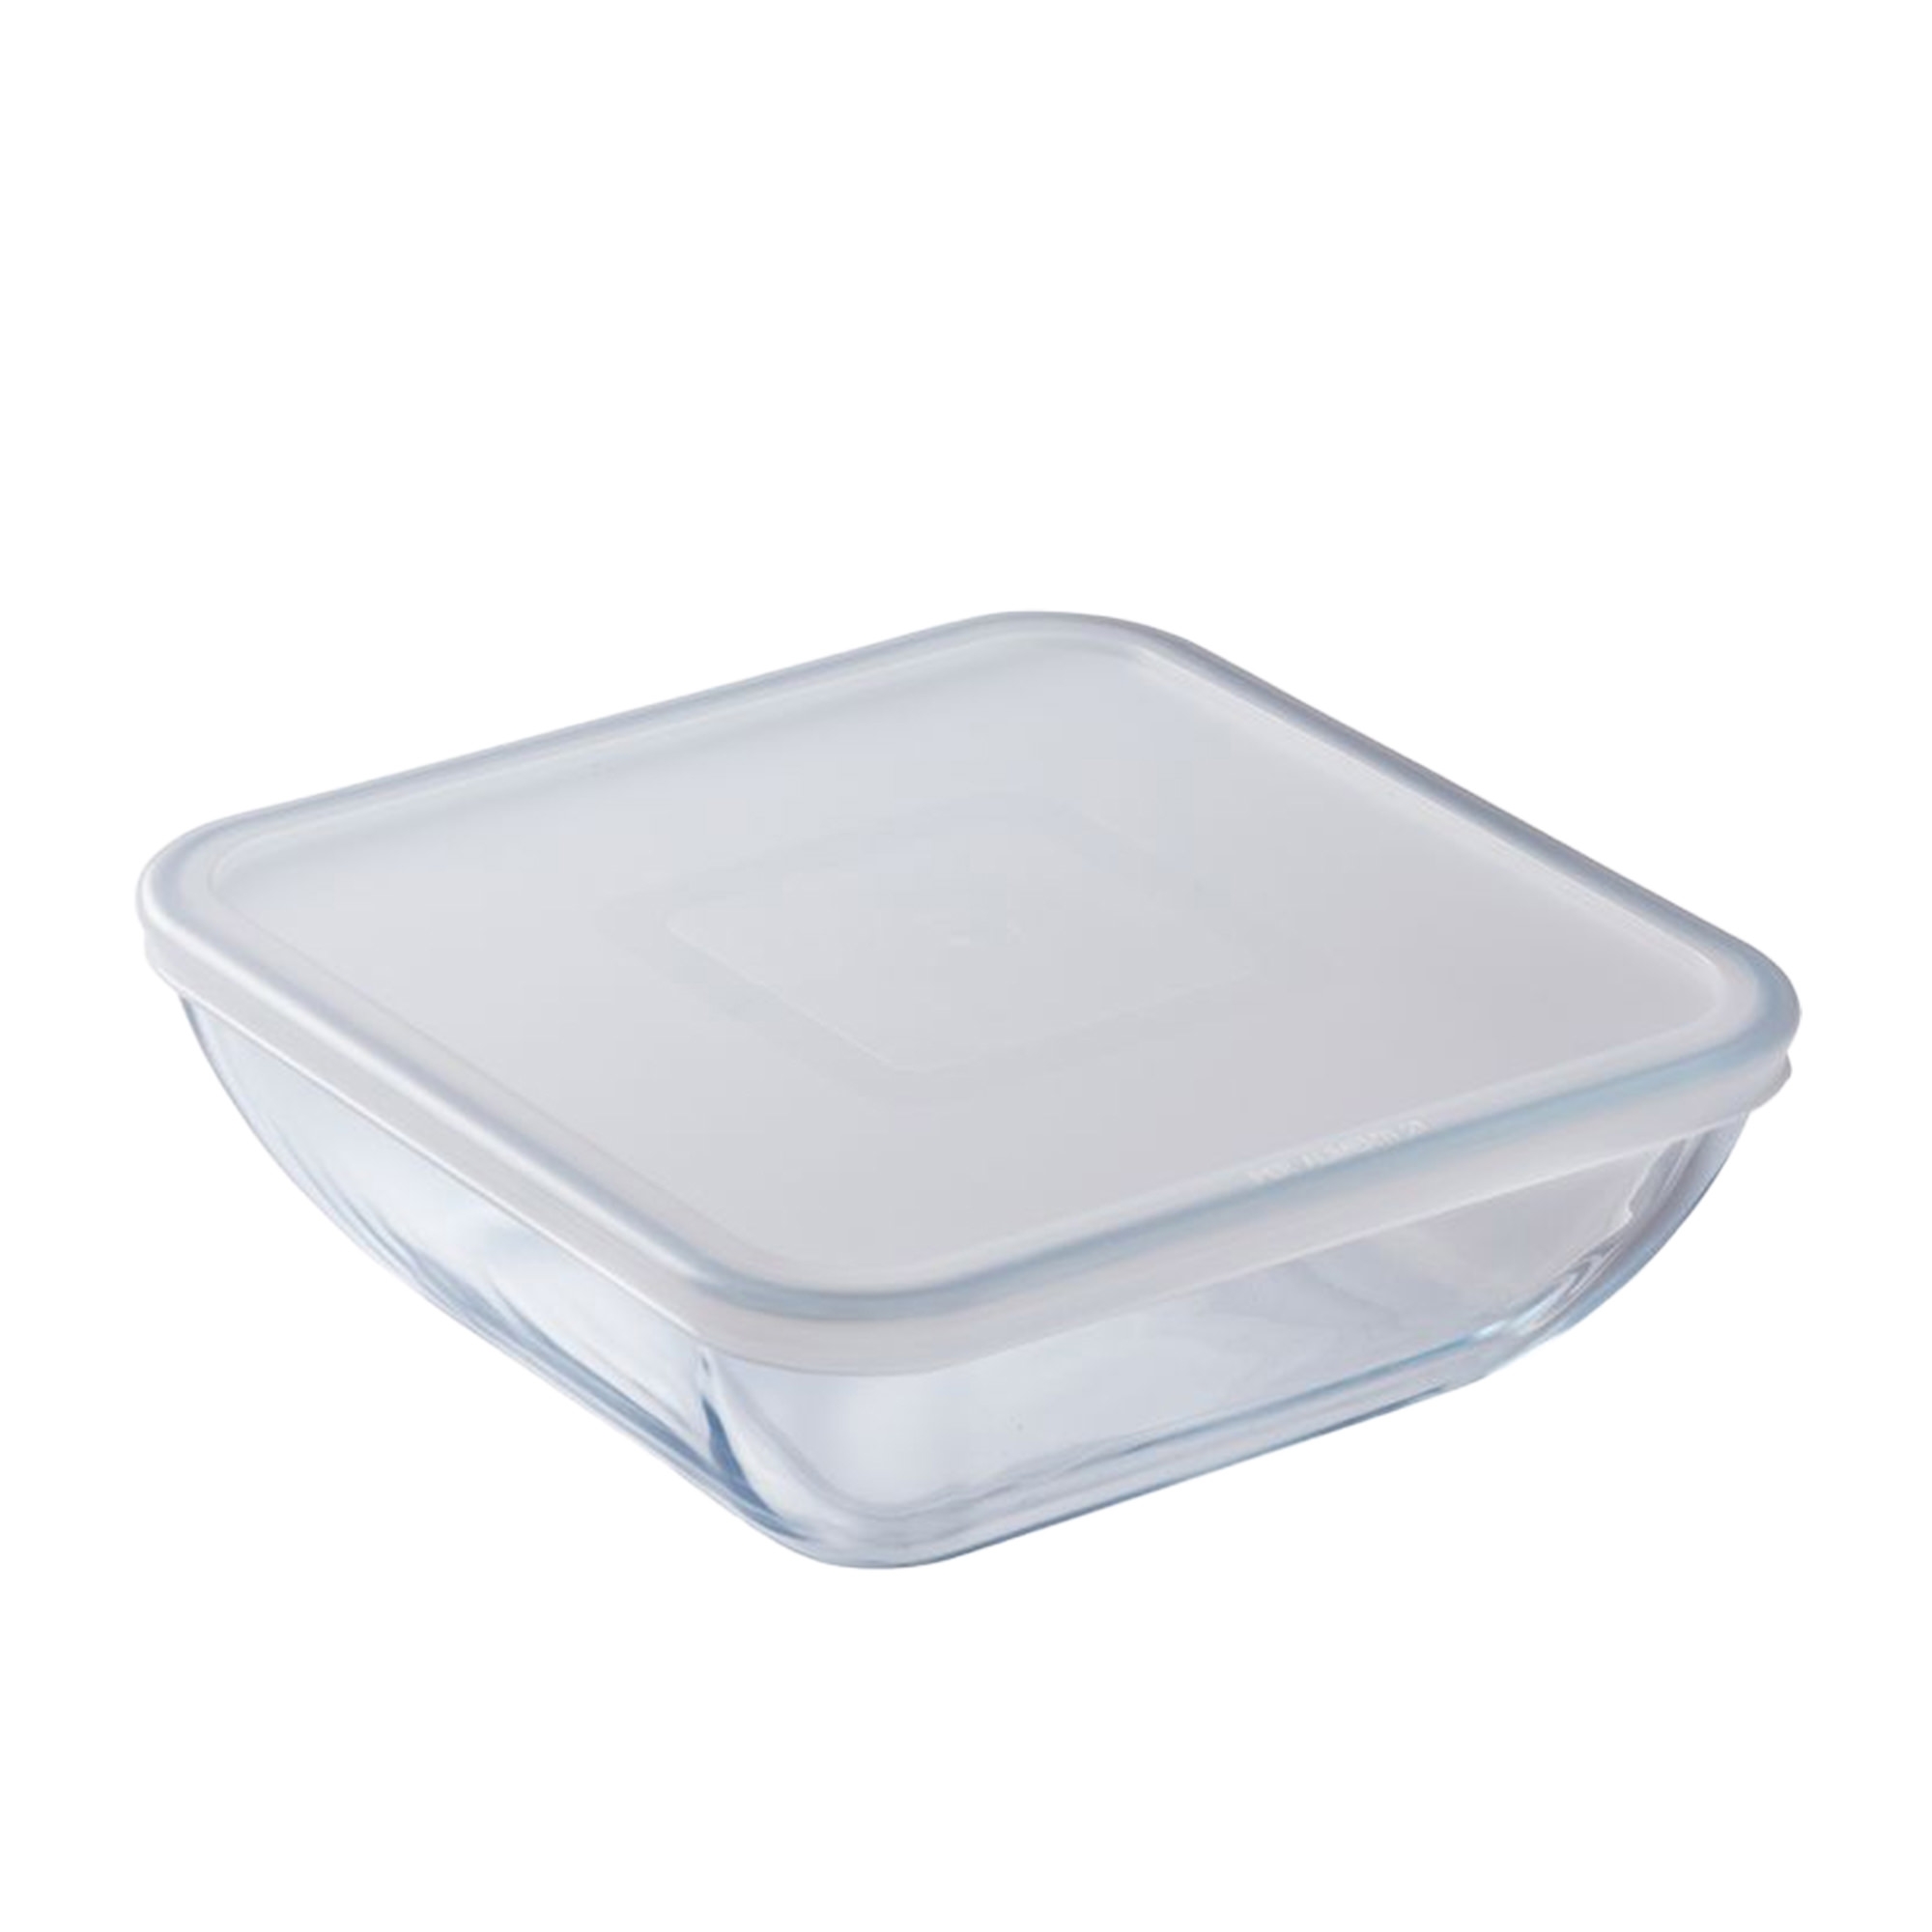 O' Cuisine Square Glass Food Storage Container 1.6L Image 1